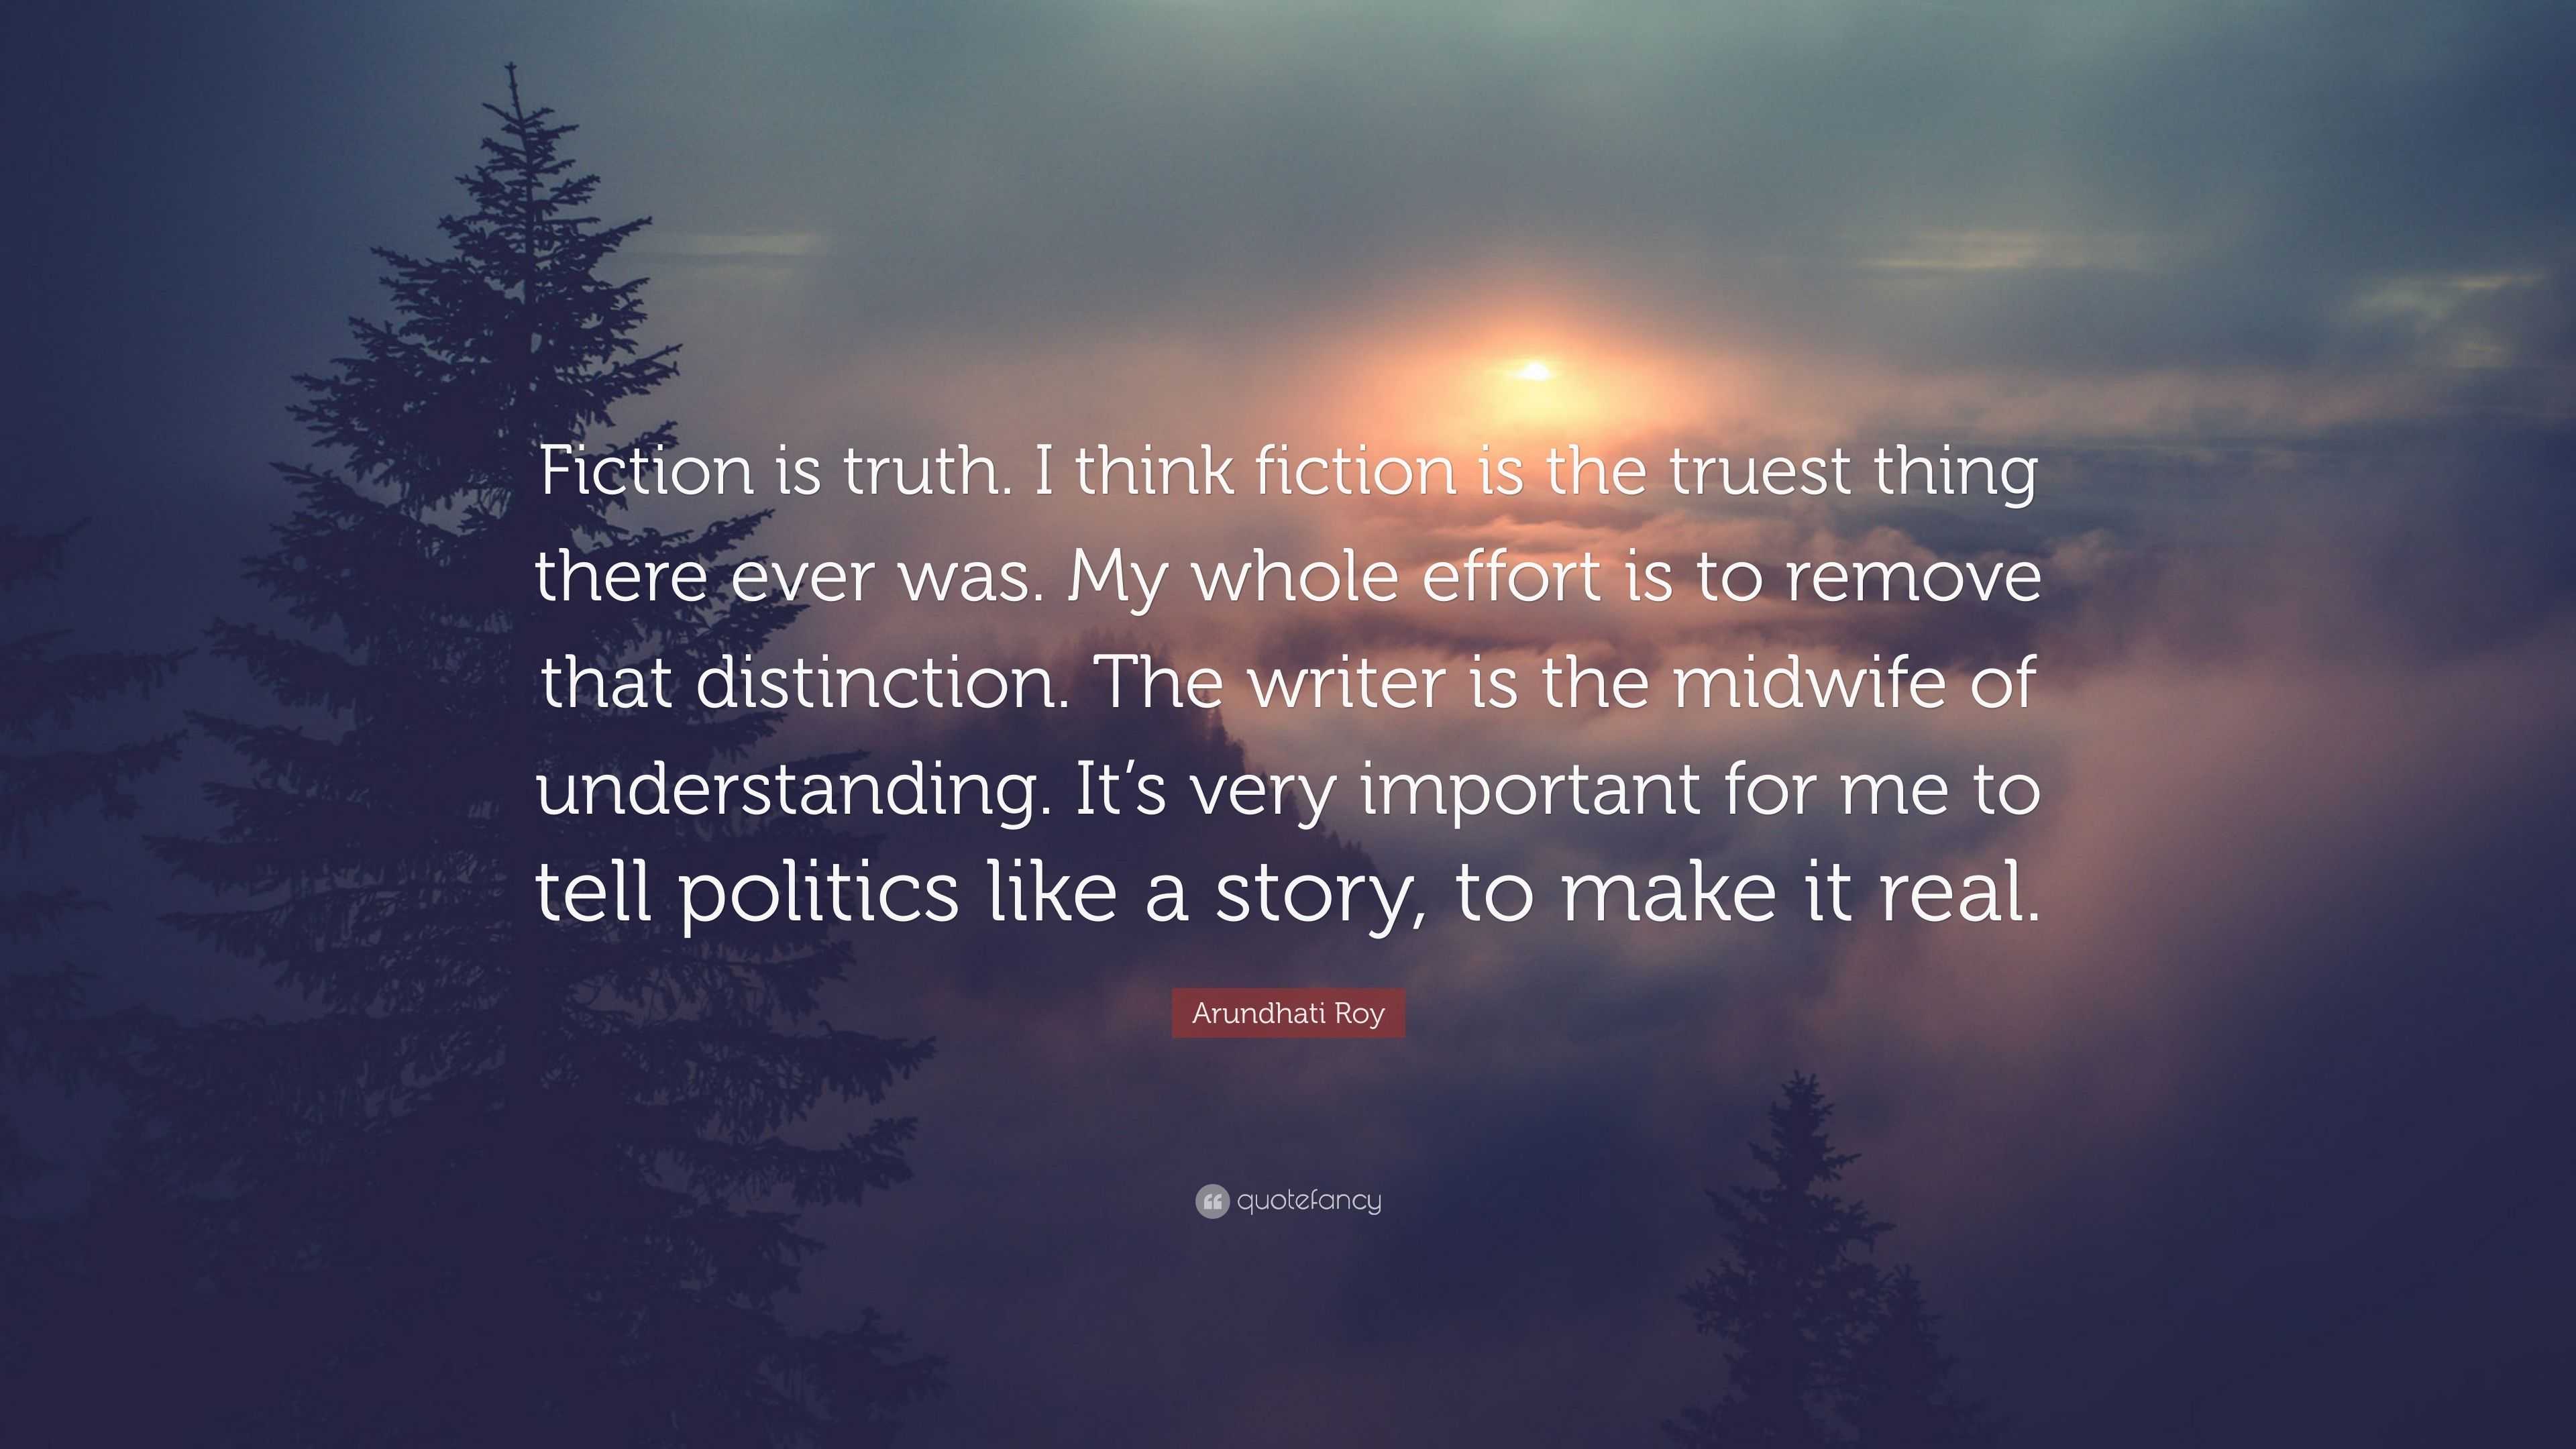 Arundhati Roy Quote: “Fiction is truth. I think fiction is the truest